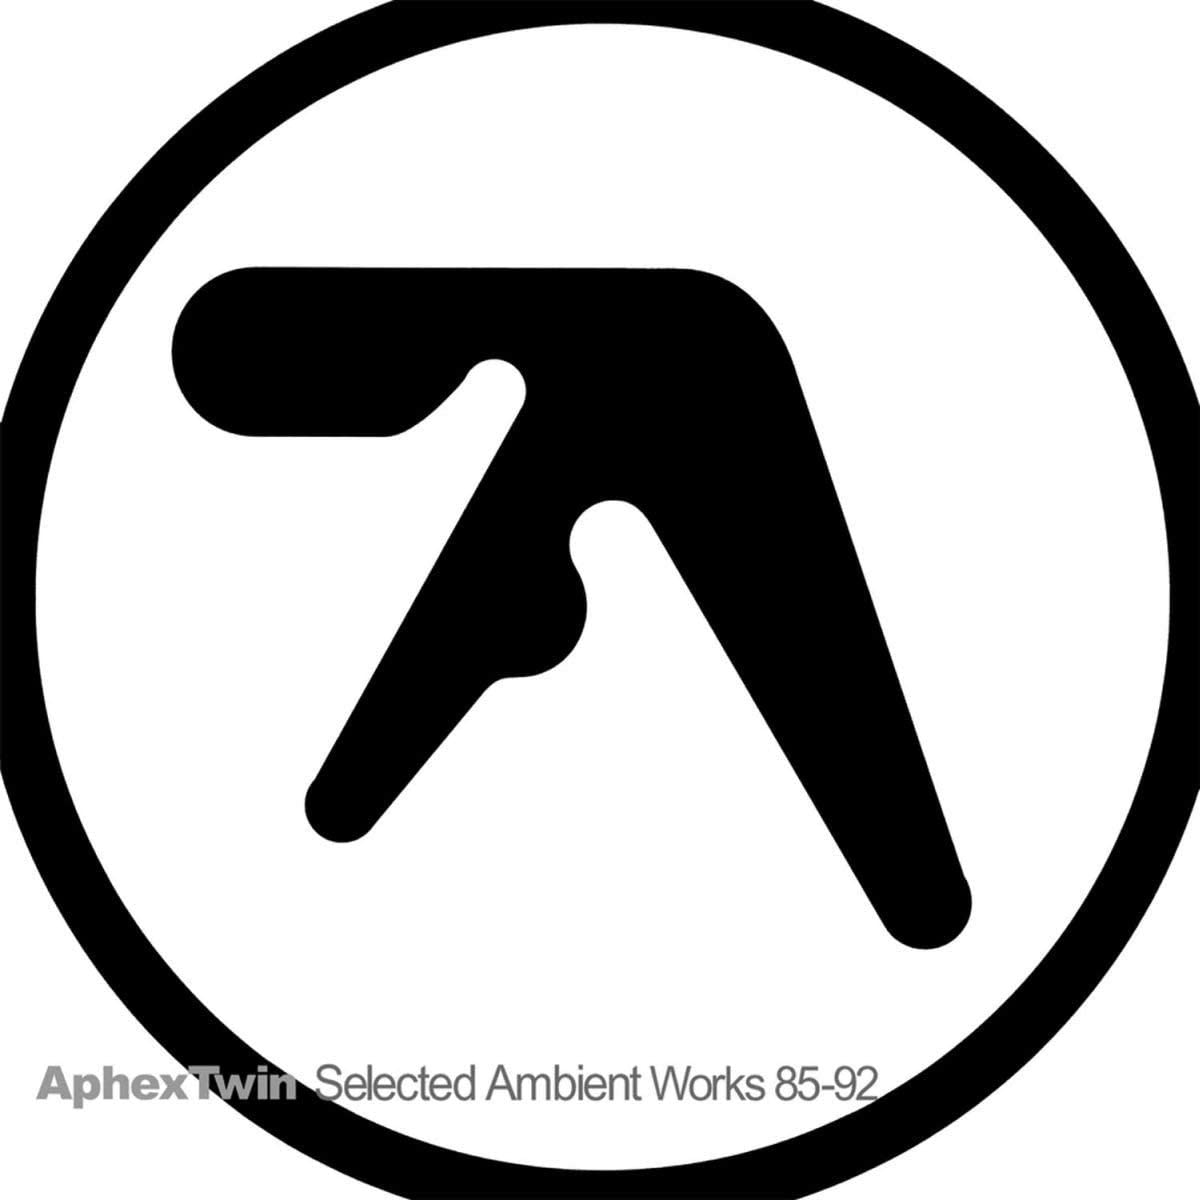 Aphex Twin/Selected Ambient Works 85-92 [LP]